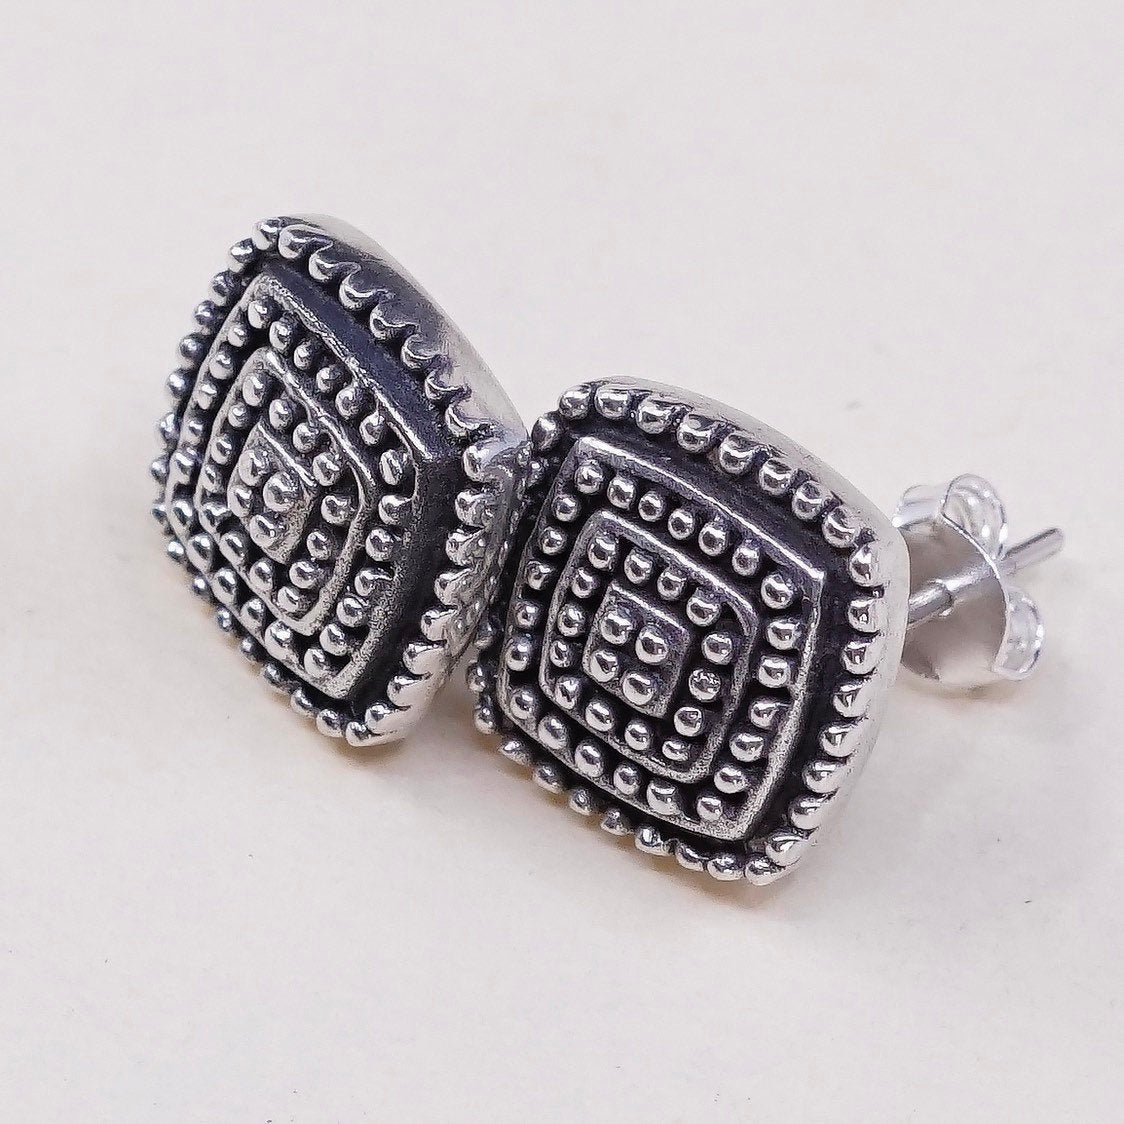 vtg sterling silver handmade earrings, solid 925 silver studs with beads